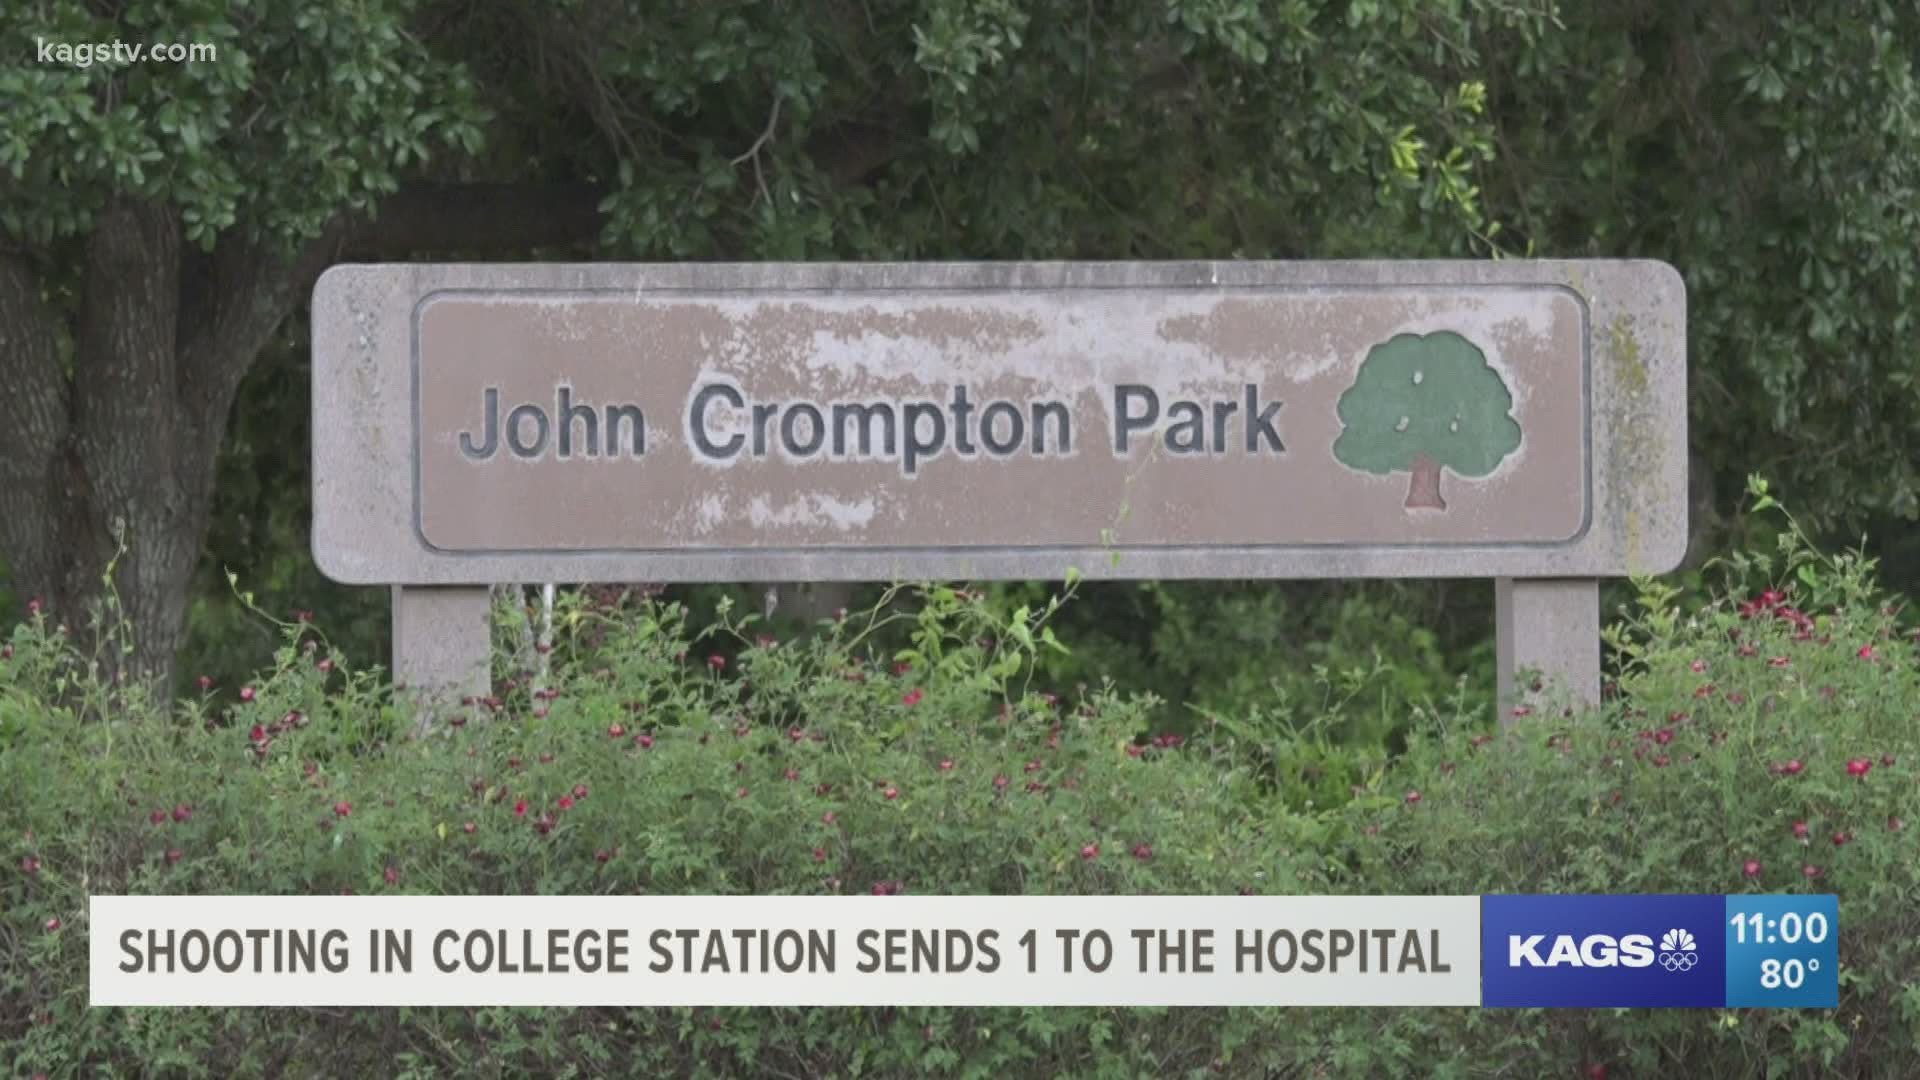 The shooting happened after 7 p.m. near John Crompton Park.